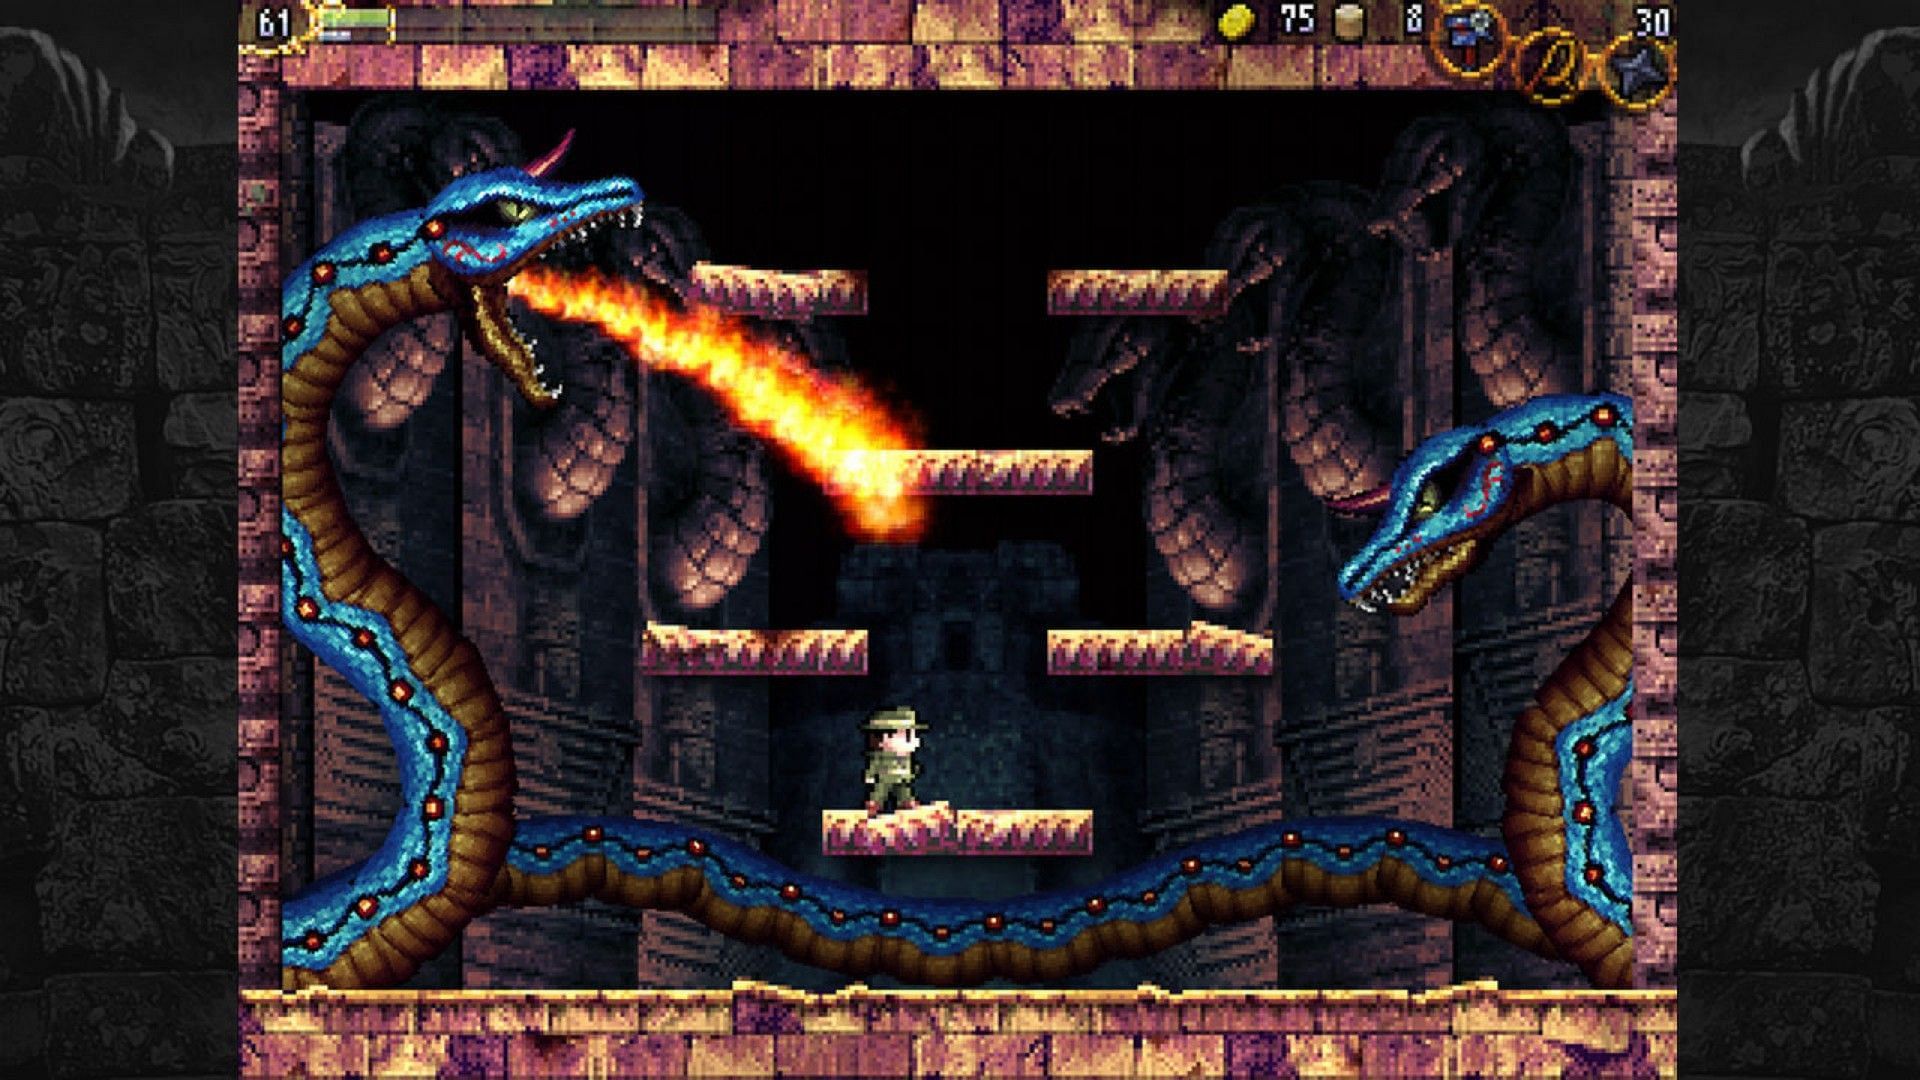 La-Mulana will bring out the archeologist inside you. (Image via Playism)